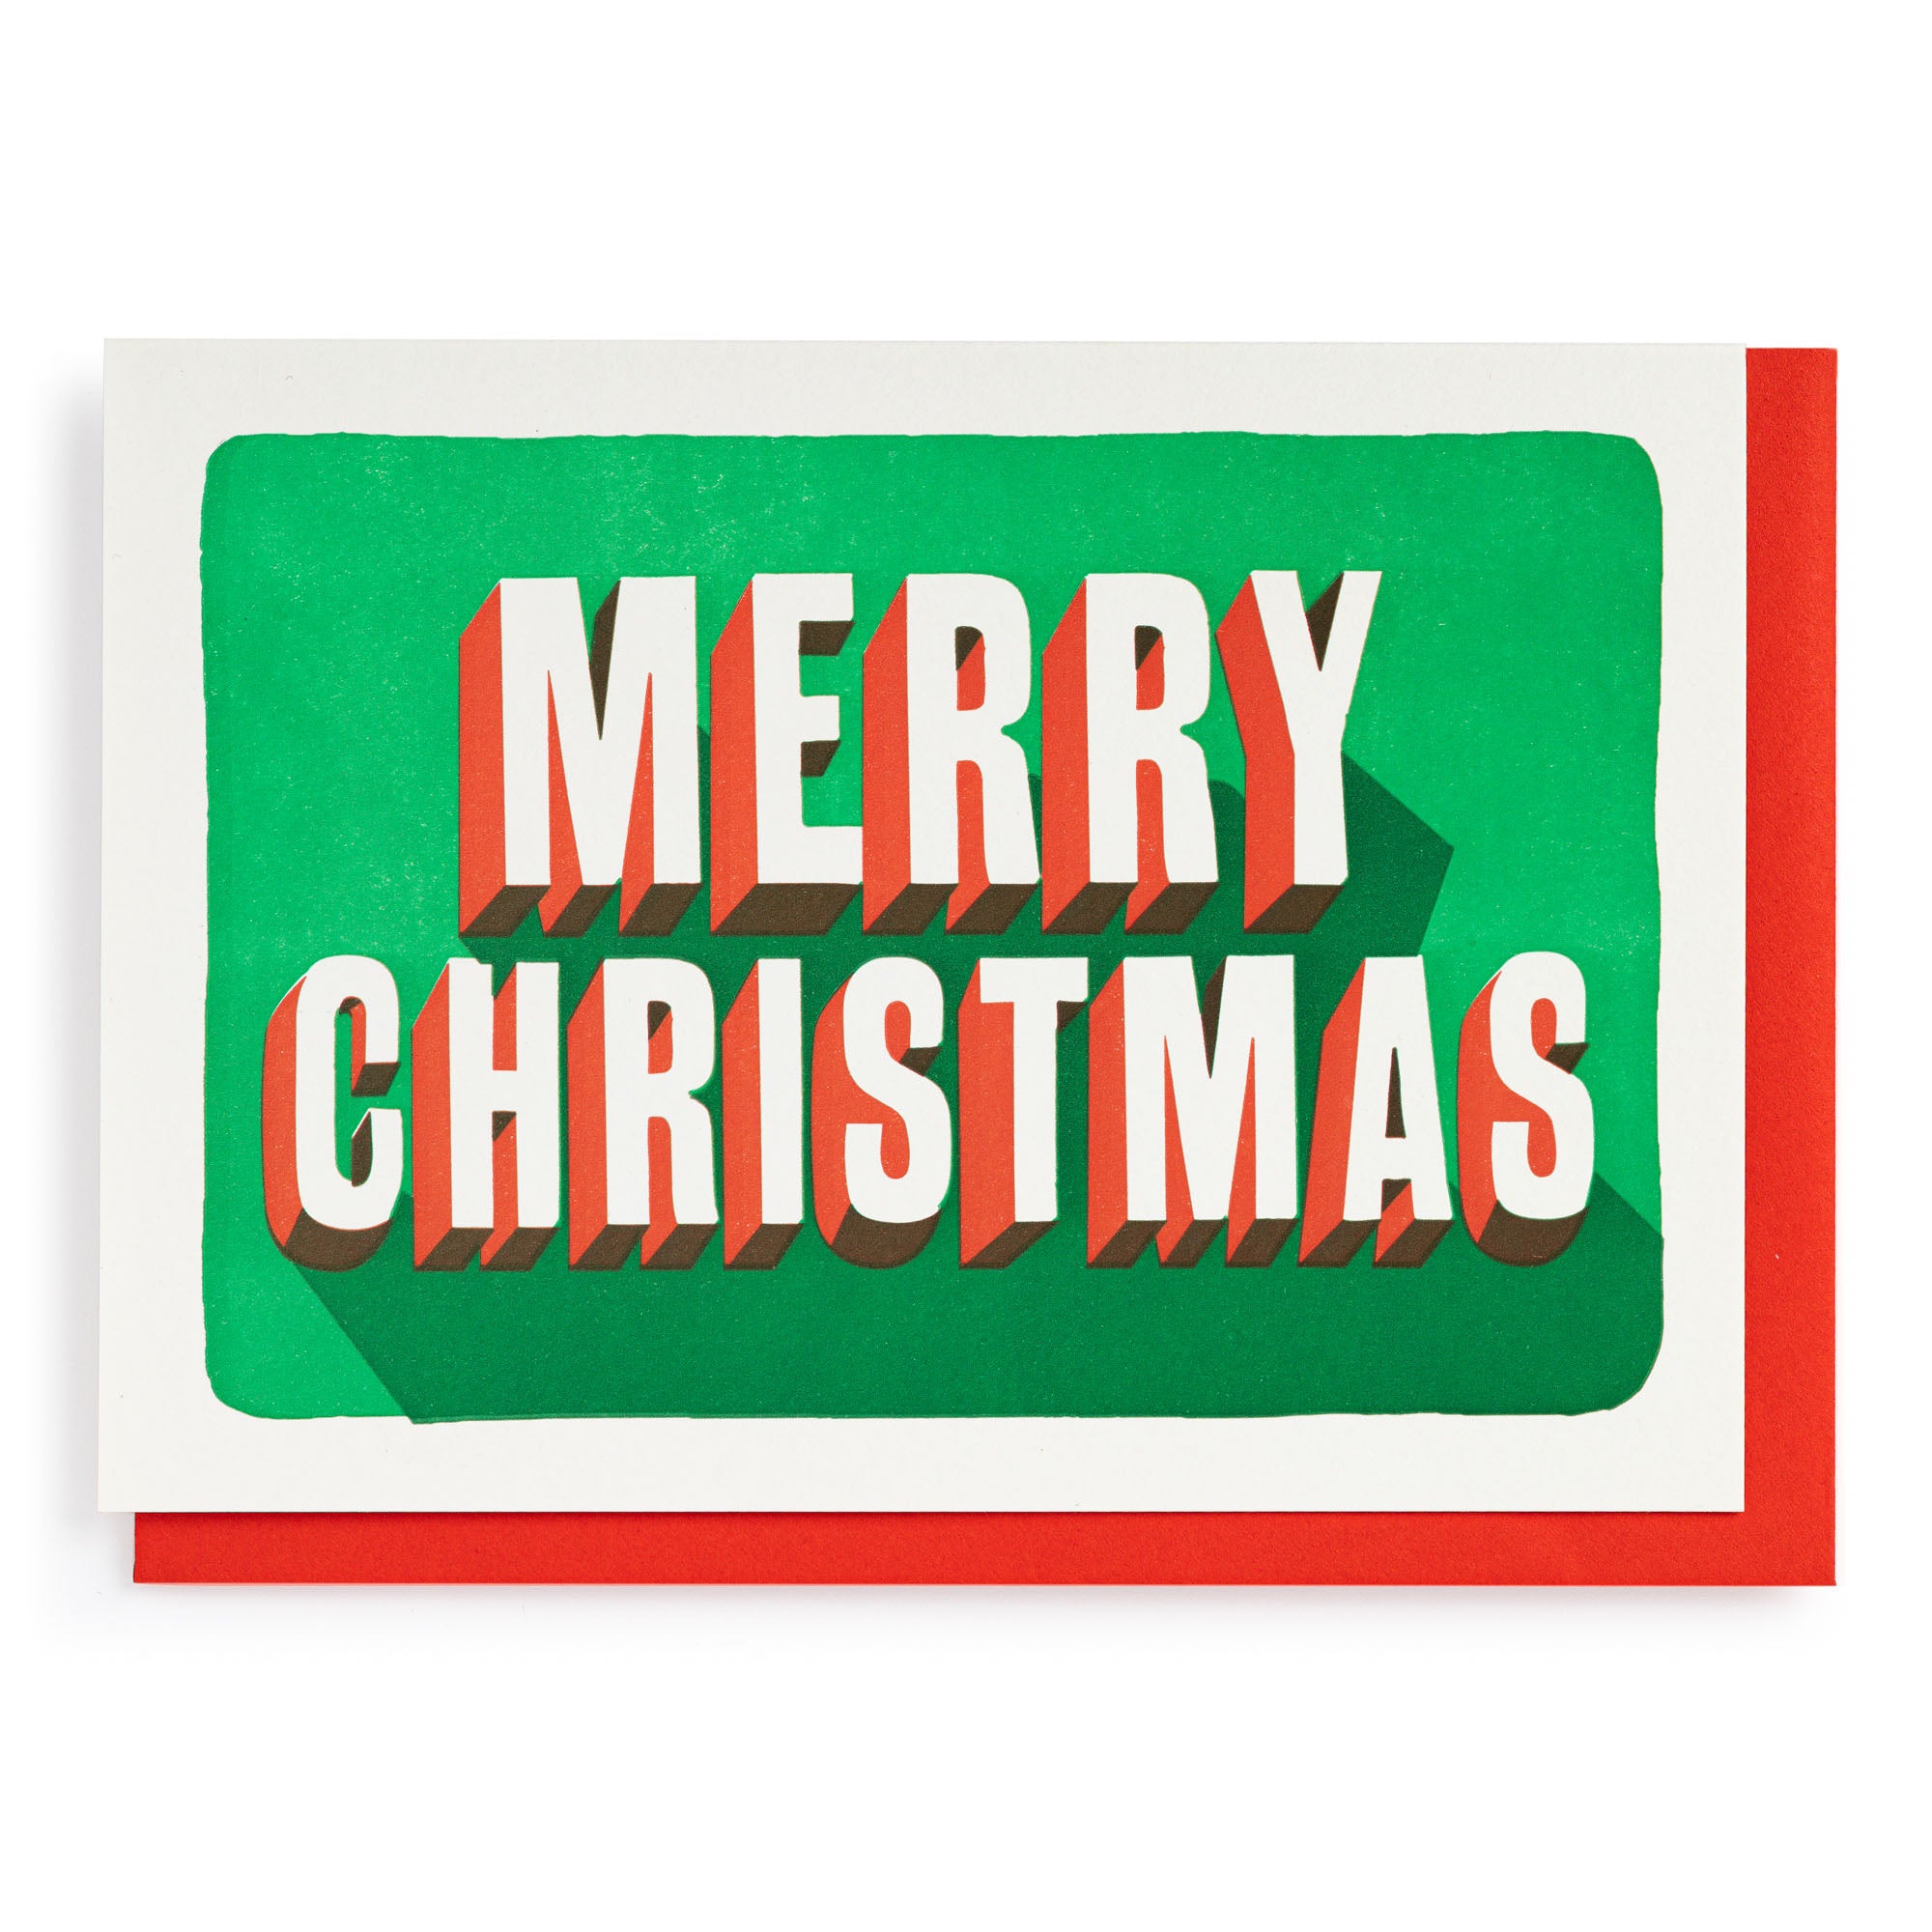 MERRY CHRISTMAS | CARD BY ARCHIVIST